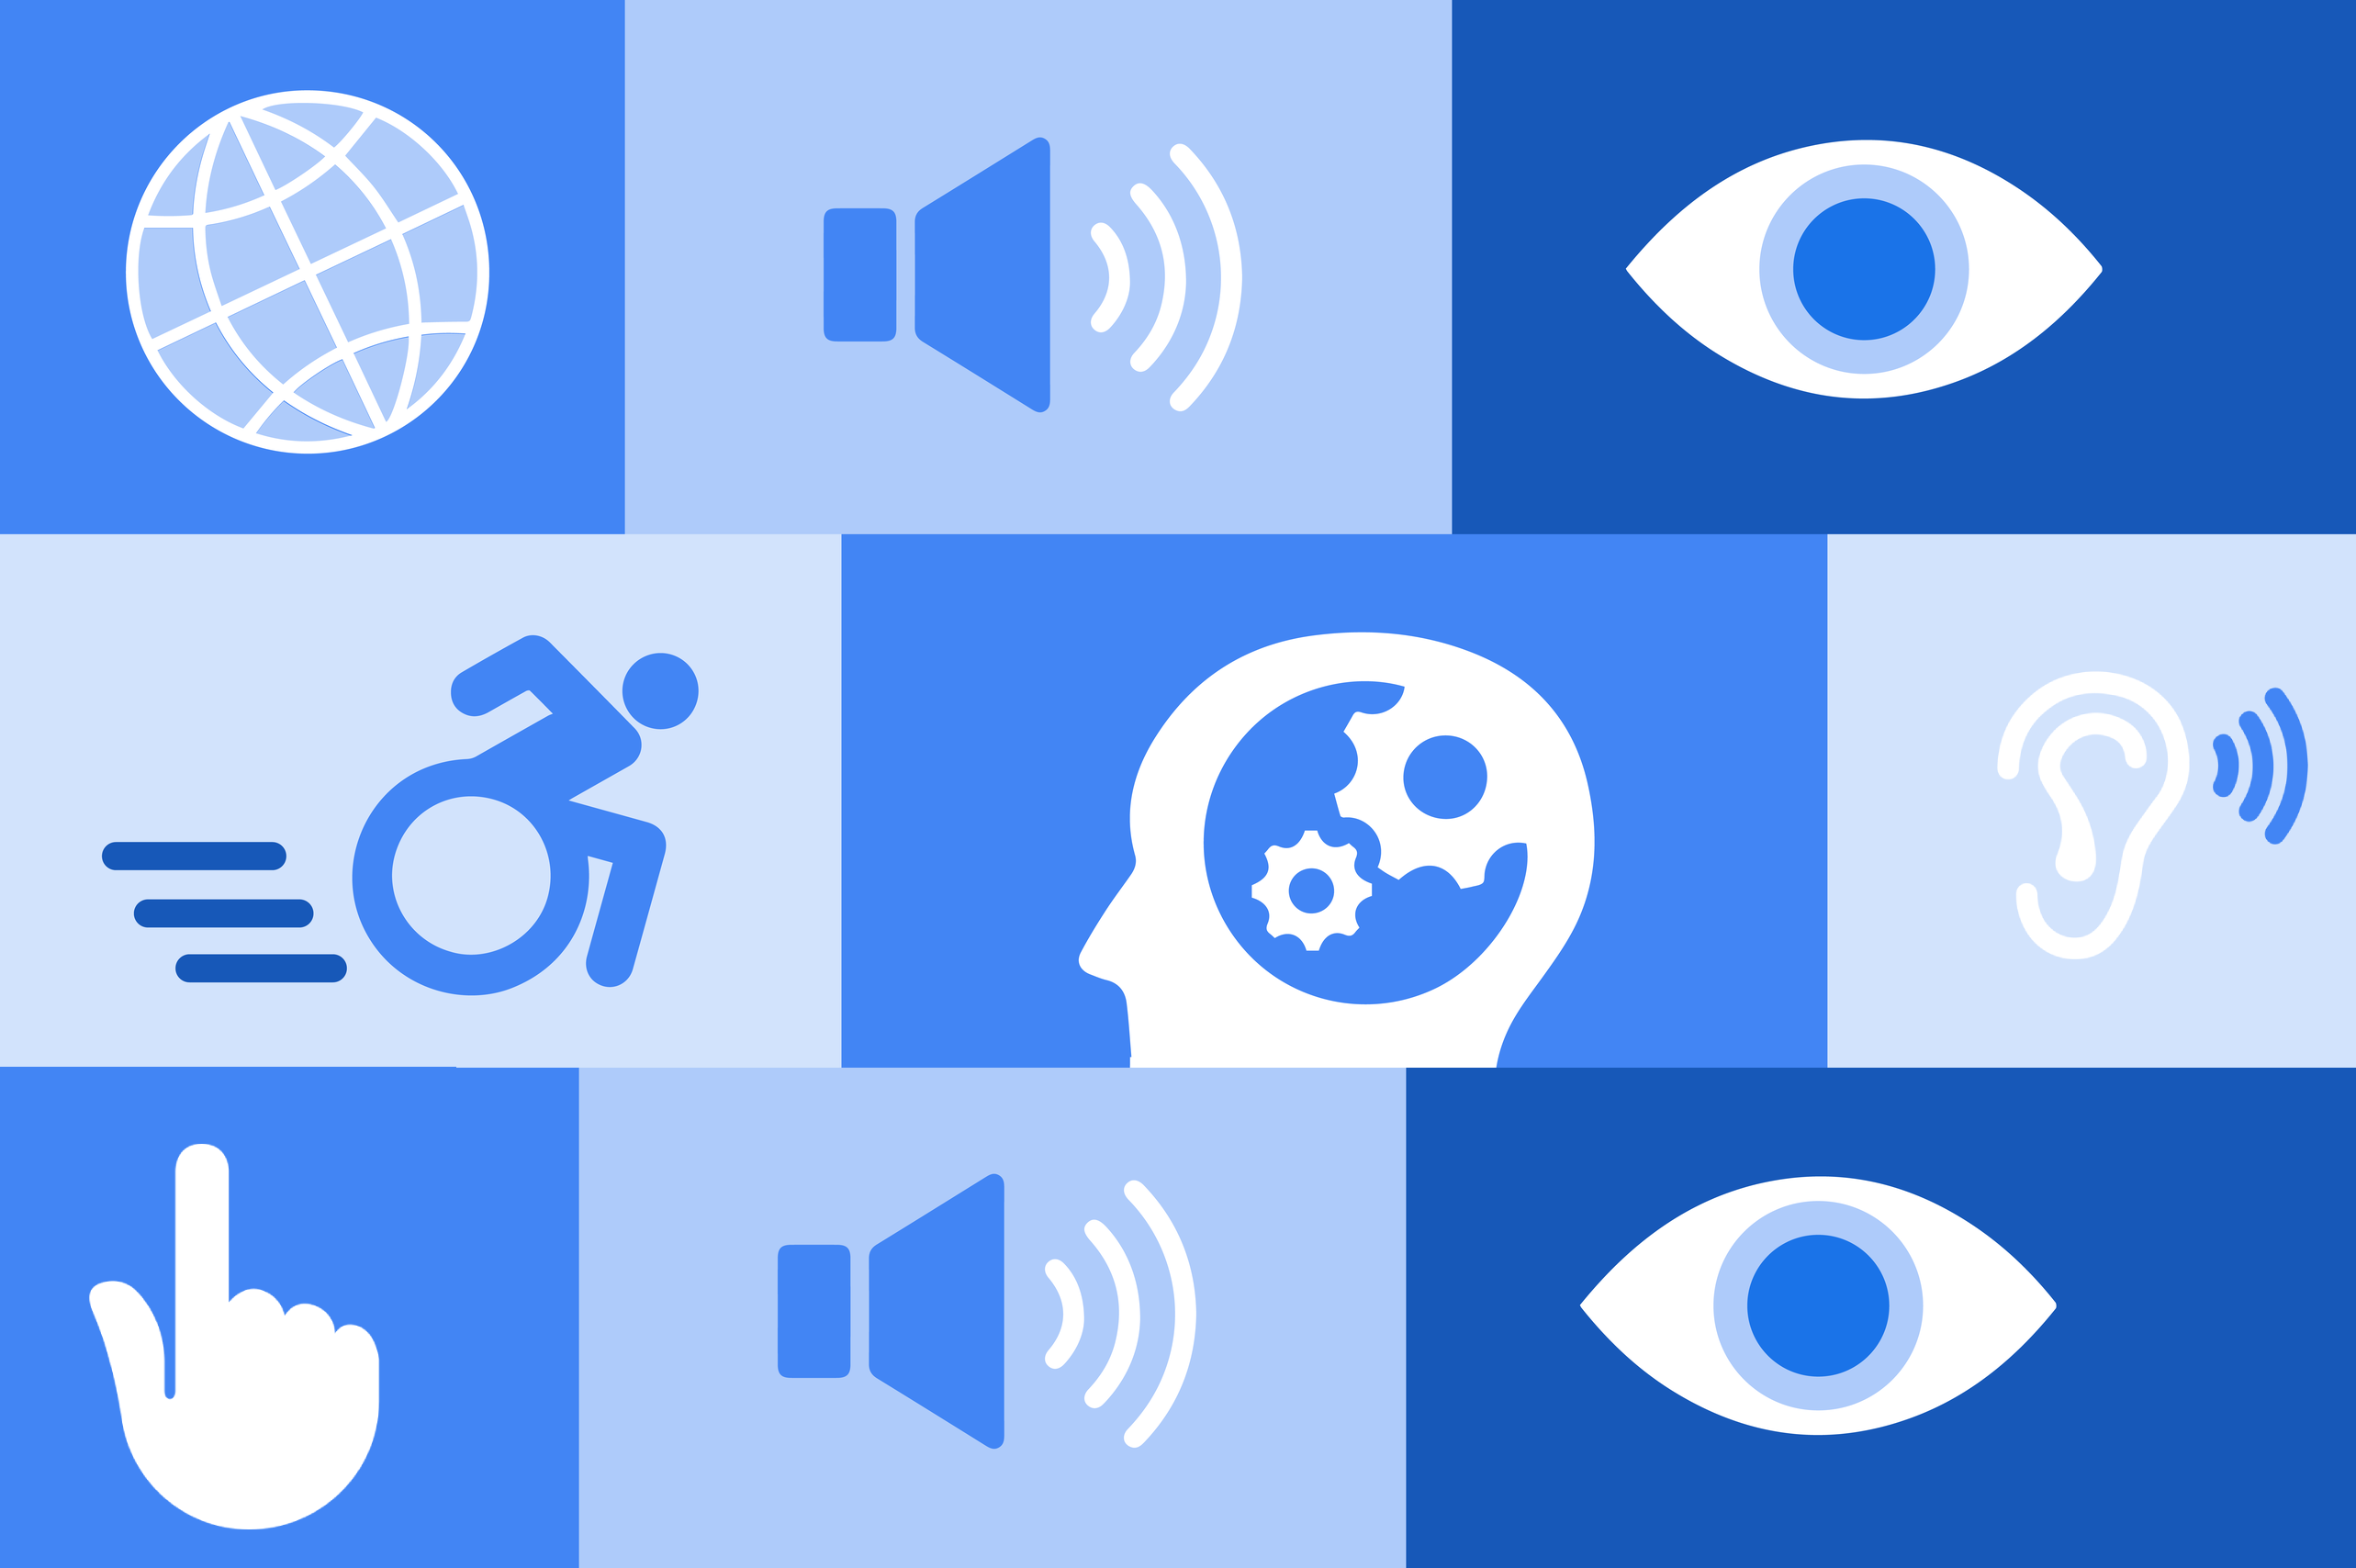 Google’s Latest Update Focuses On Inclusivity For People With Visual, Speech, And Hearing Disabilities